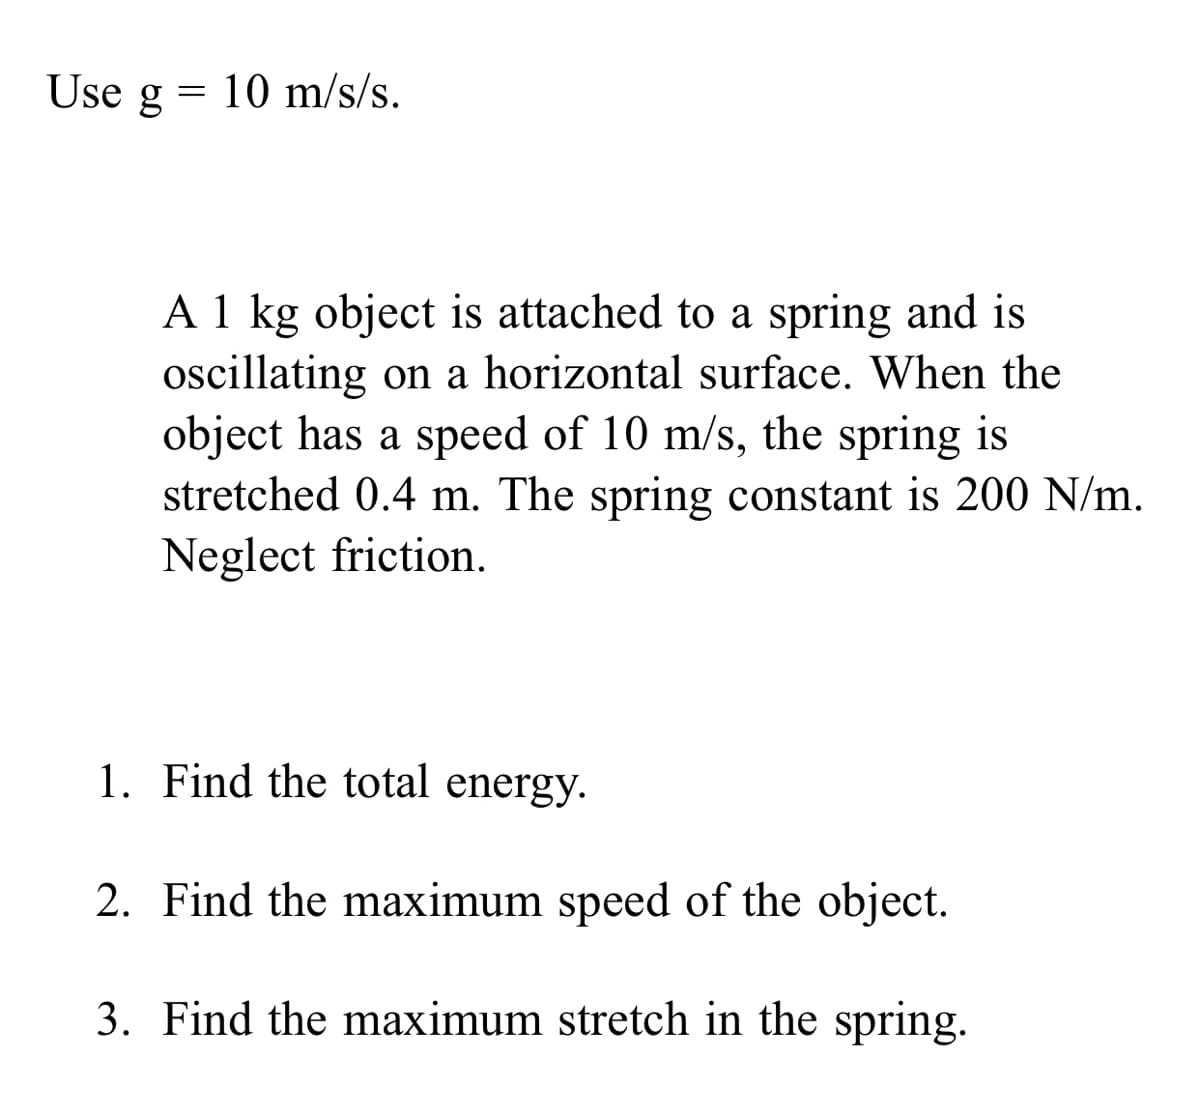 Use g
= 10 m/s/s.
A 1 kg object is attached to a spring and is
oscillating on a horizontal surface. When the
object has a speed of 10 m/s, the spring is
stretched 0.4 m. The spring constant is 200 N/m.
Neglect friction.
1. Find the total energy.
2. Find the maximum speed of the object.
3. Find the maximum stretch in the spring.
